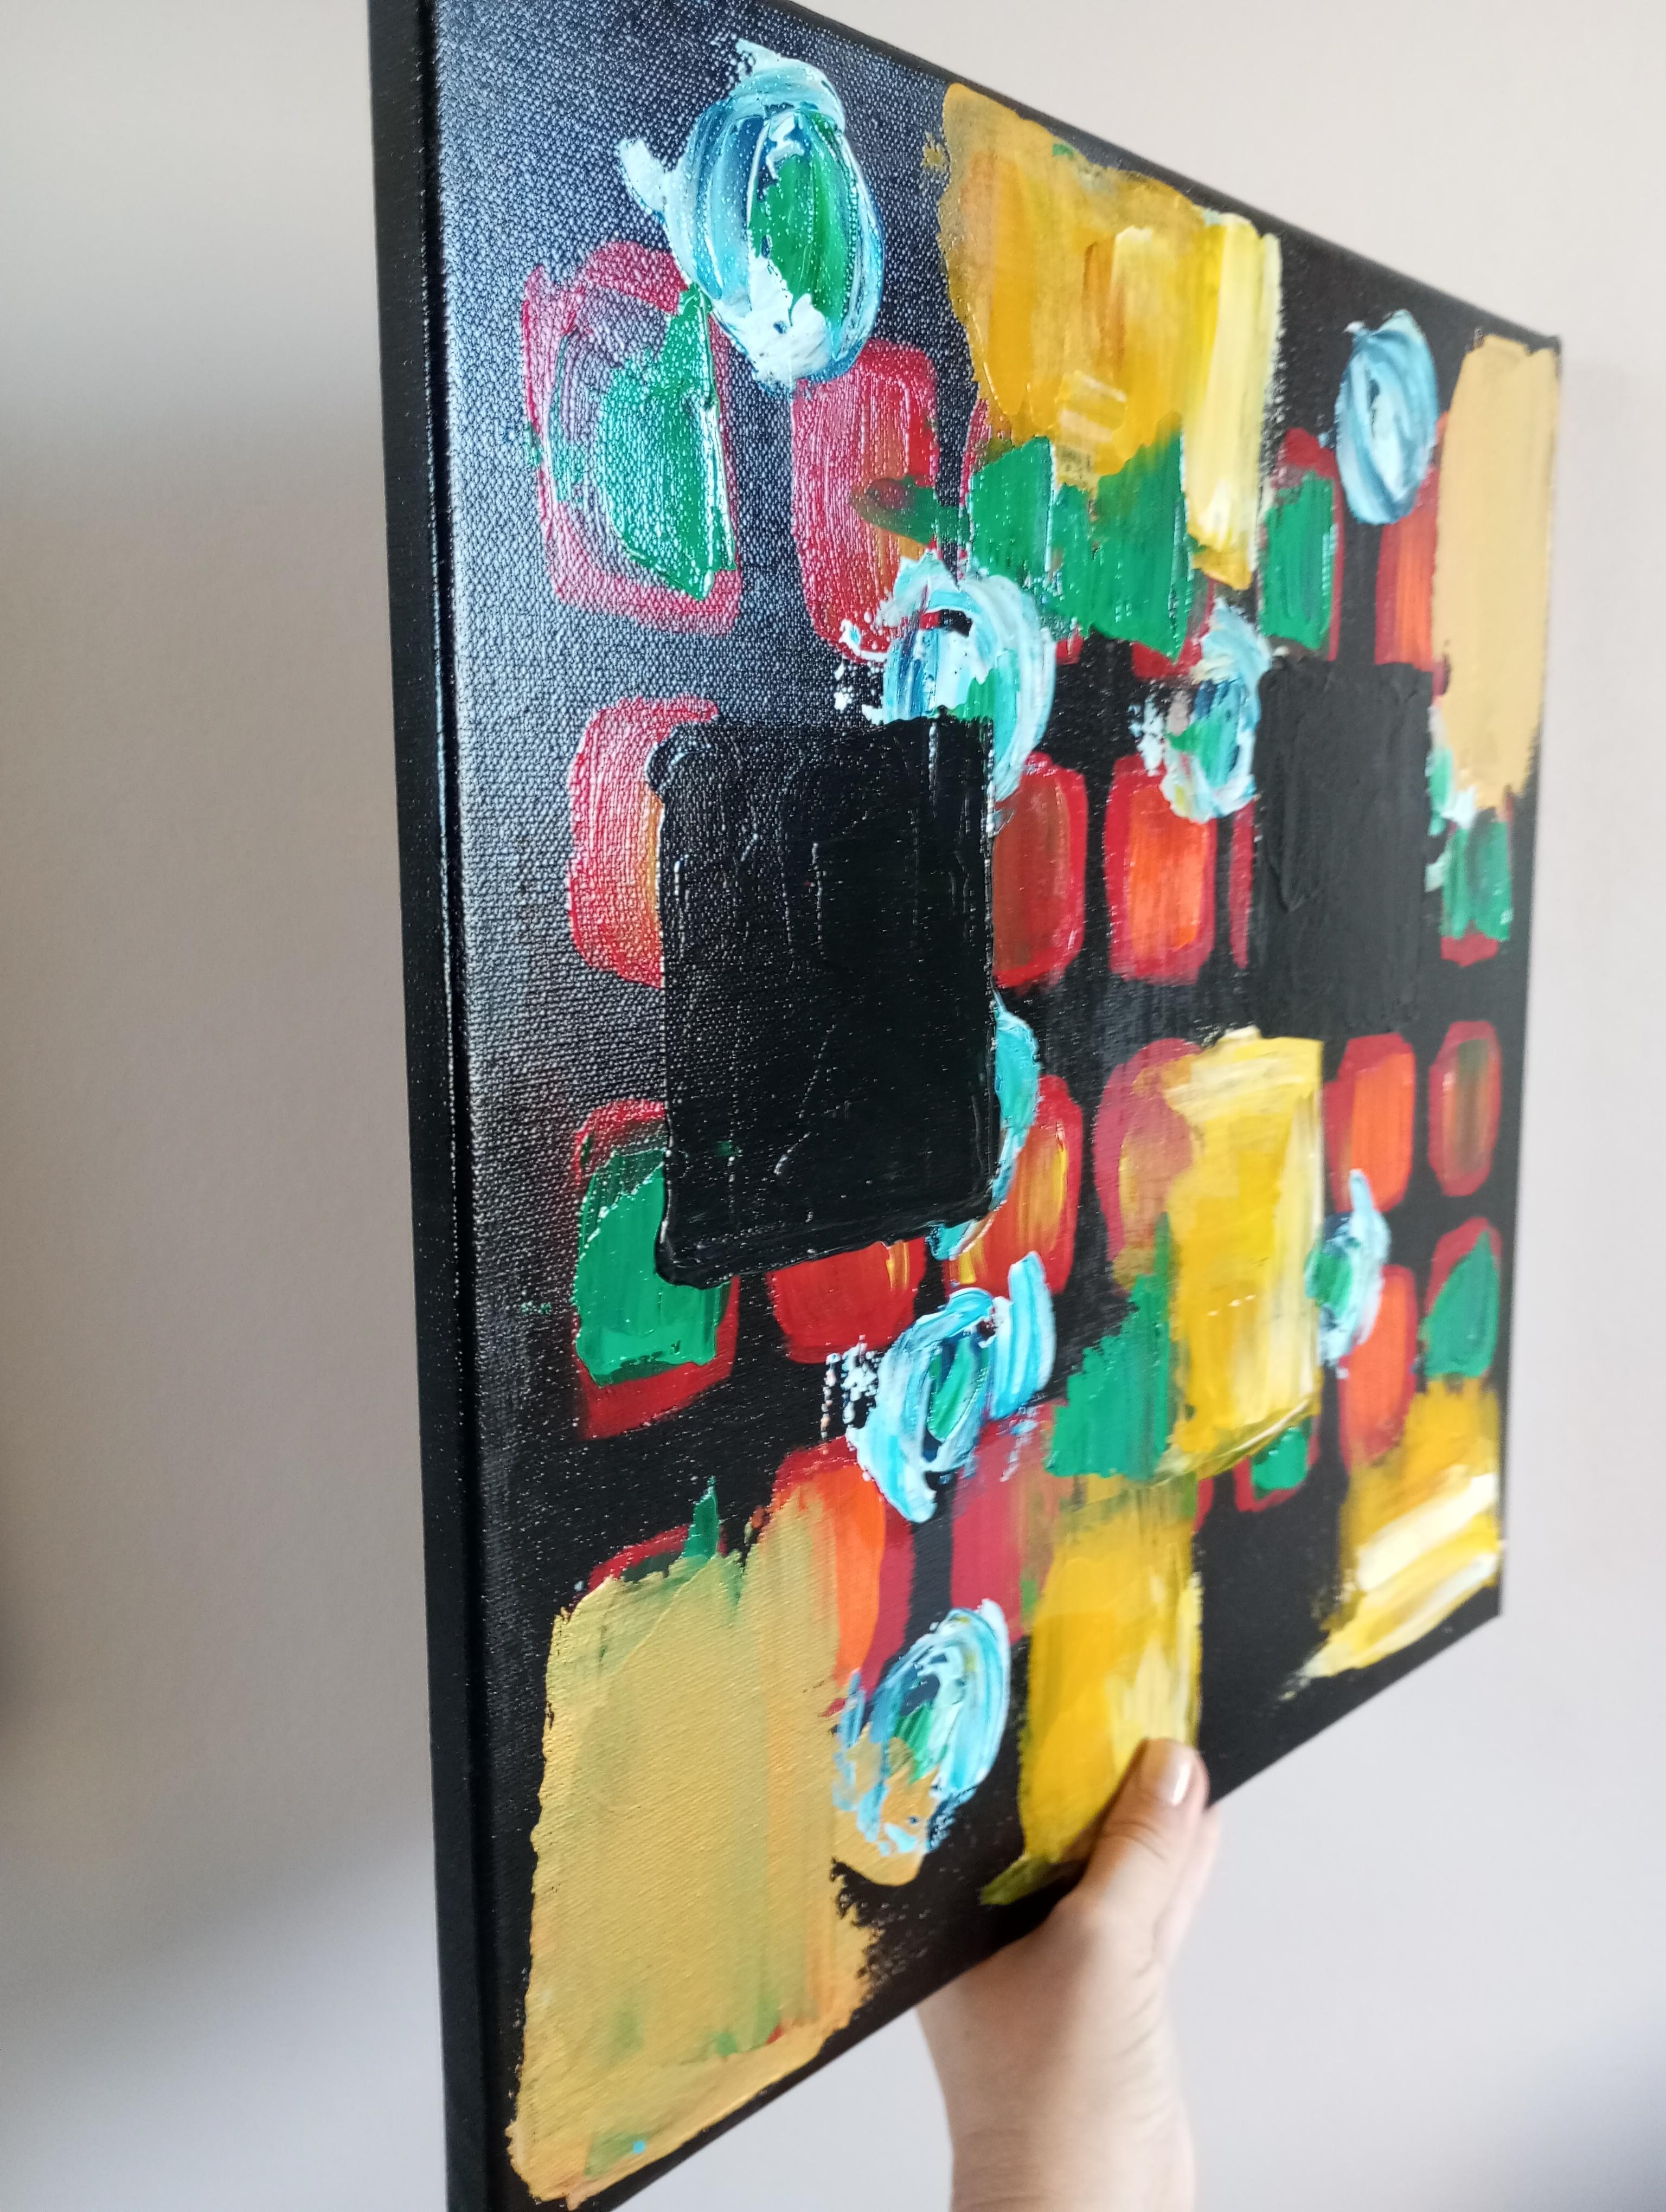  Diptych  (two canvases) abstract vibrant  interior painting  